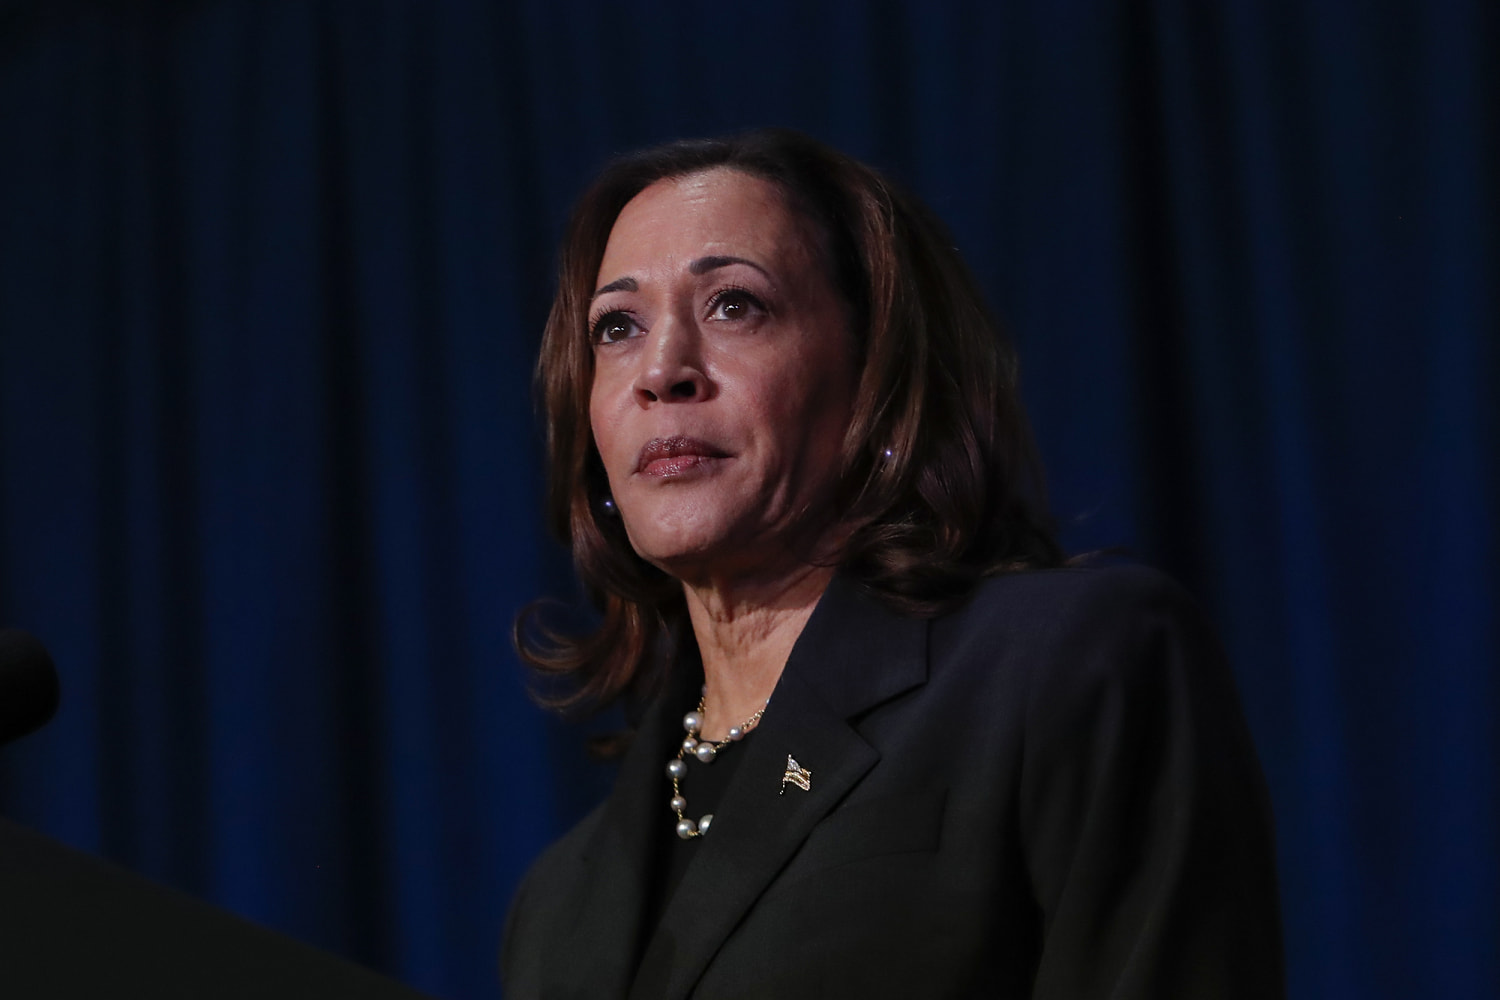 The racist right-wing attacks on Kamala Harris have begun